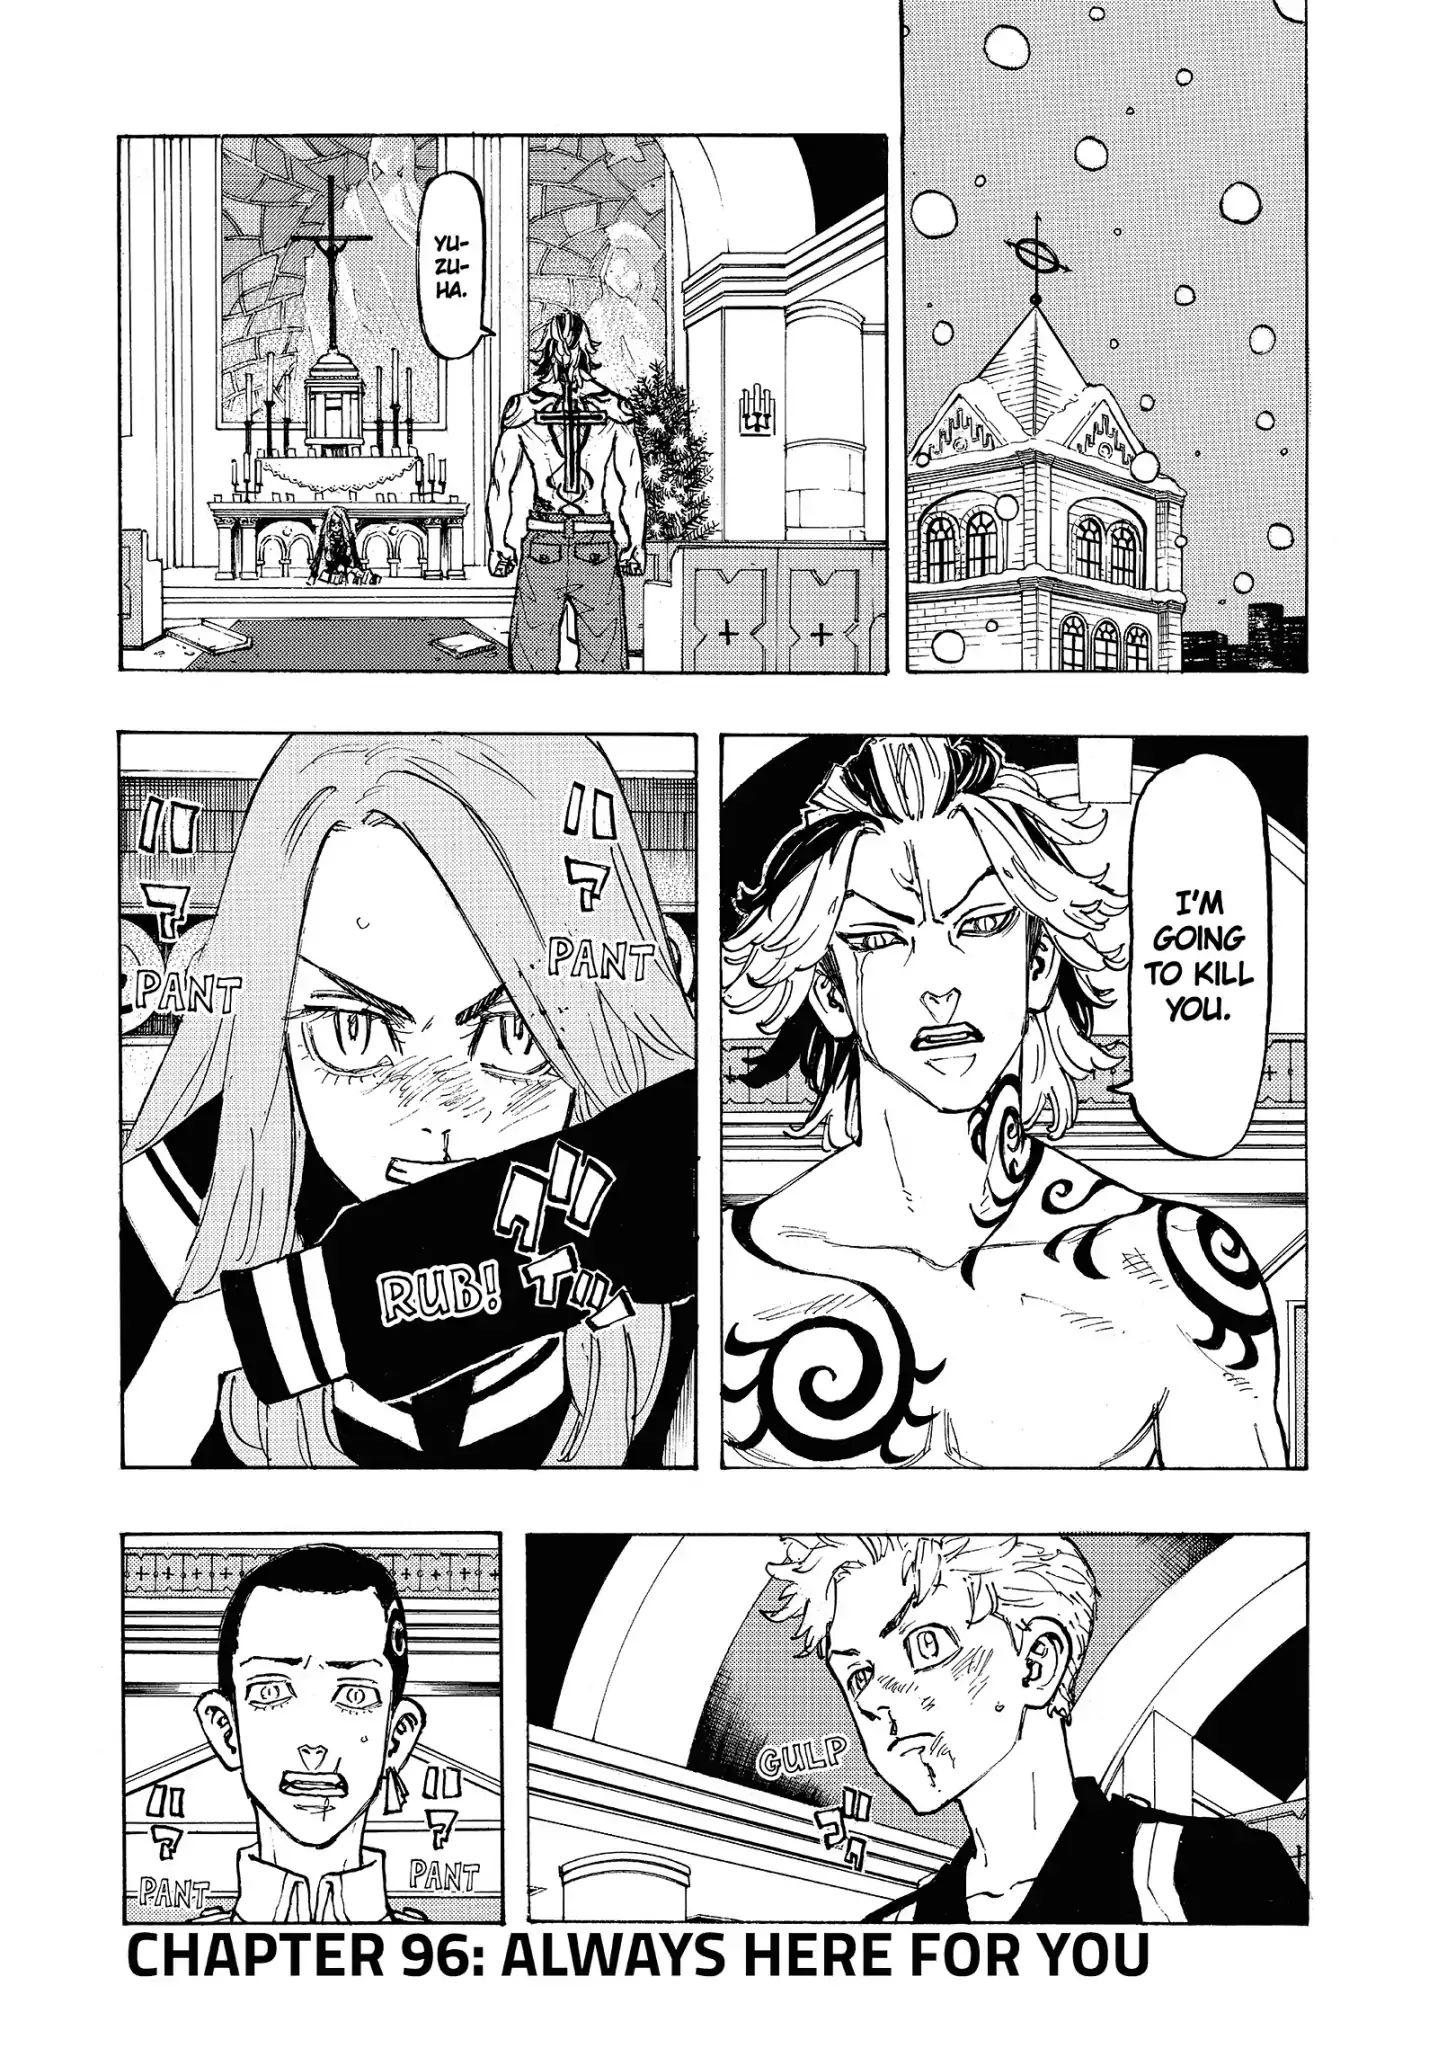 Tokyo Manji Revengers Vol.11 Chapter 96: Always Here For You  